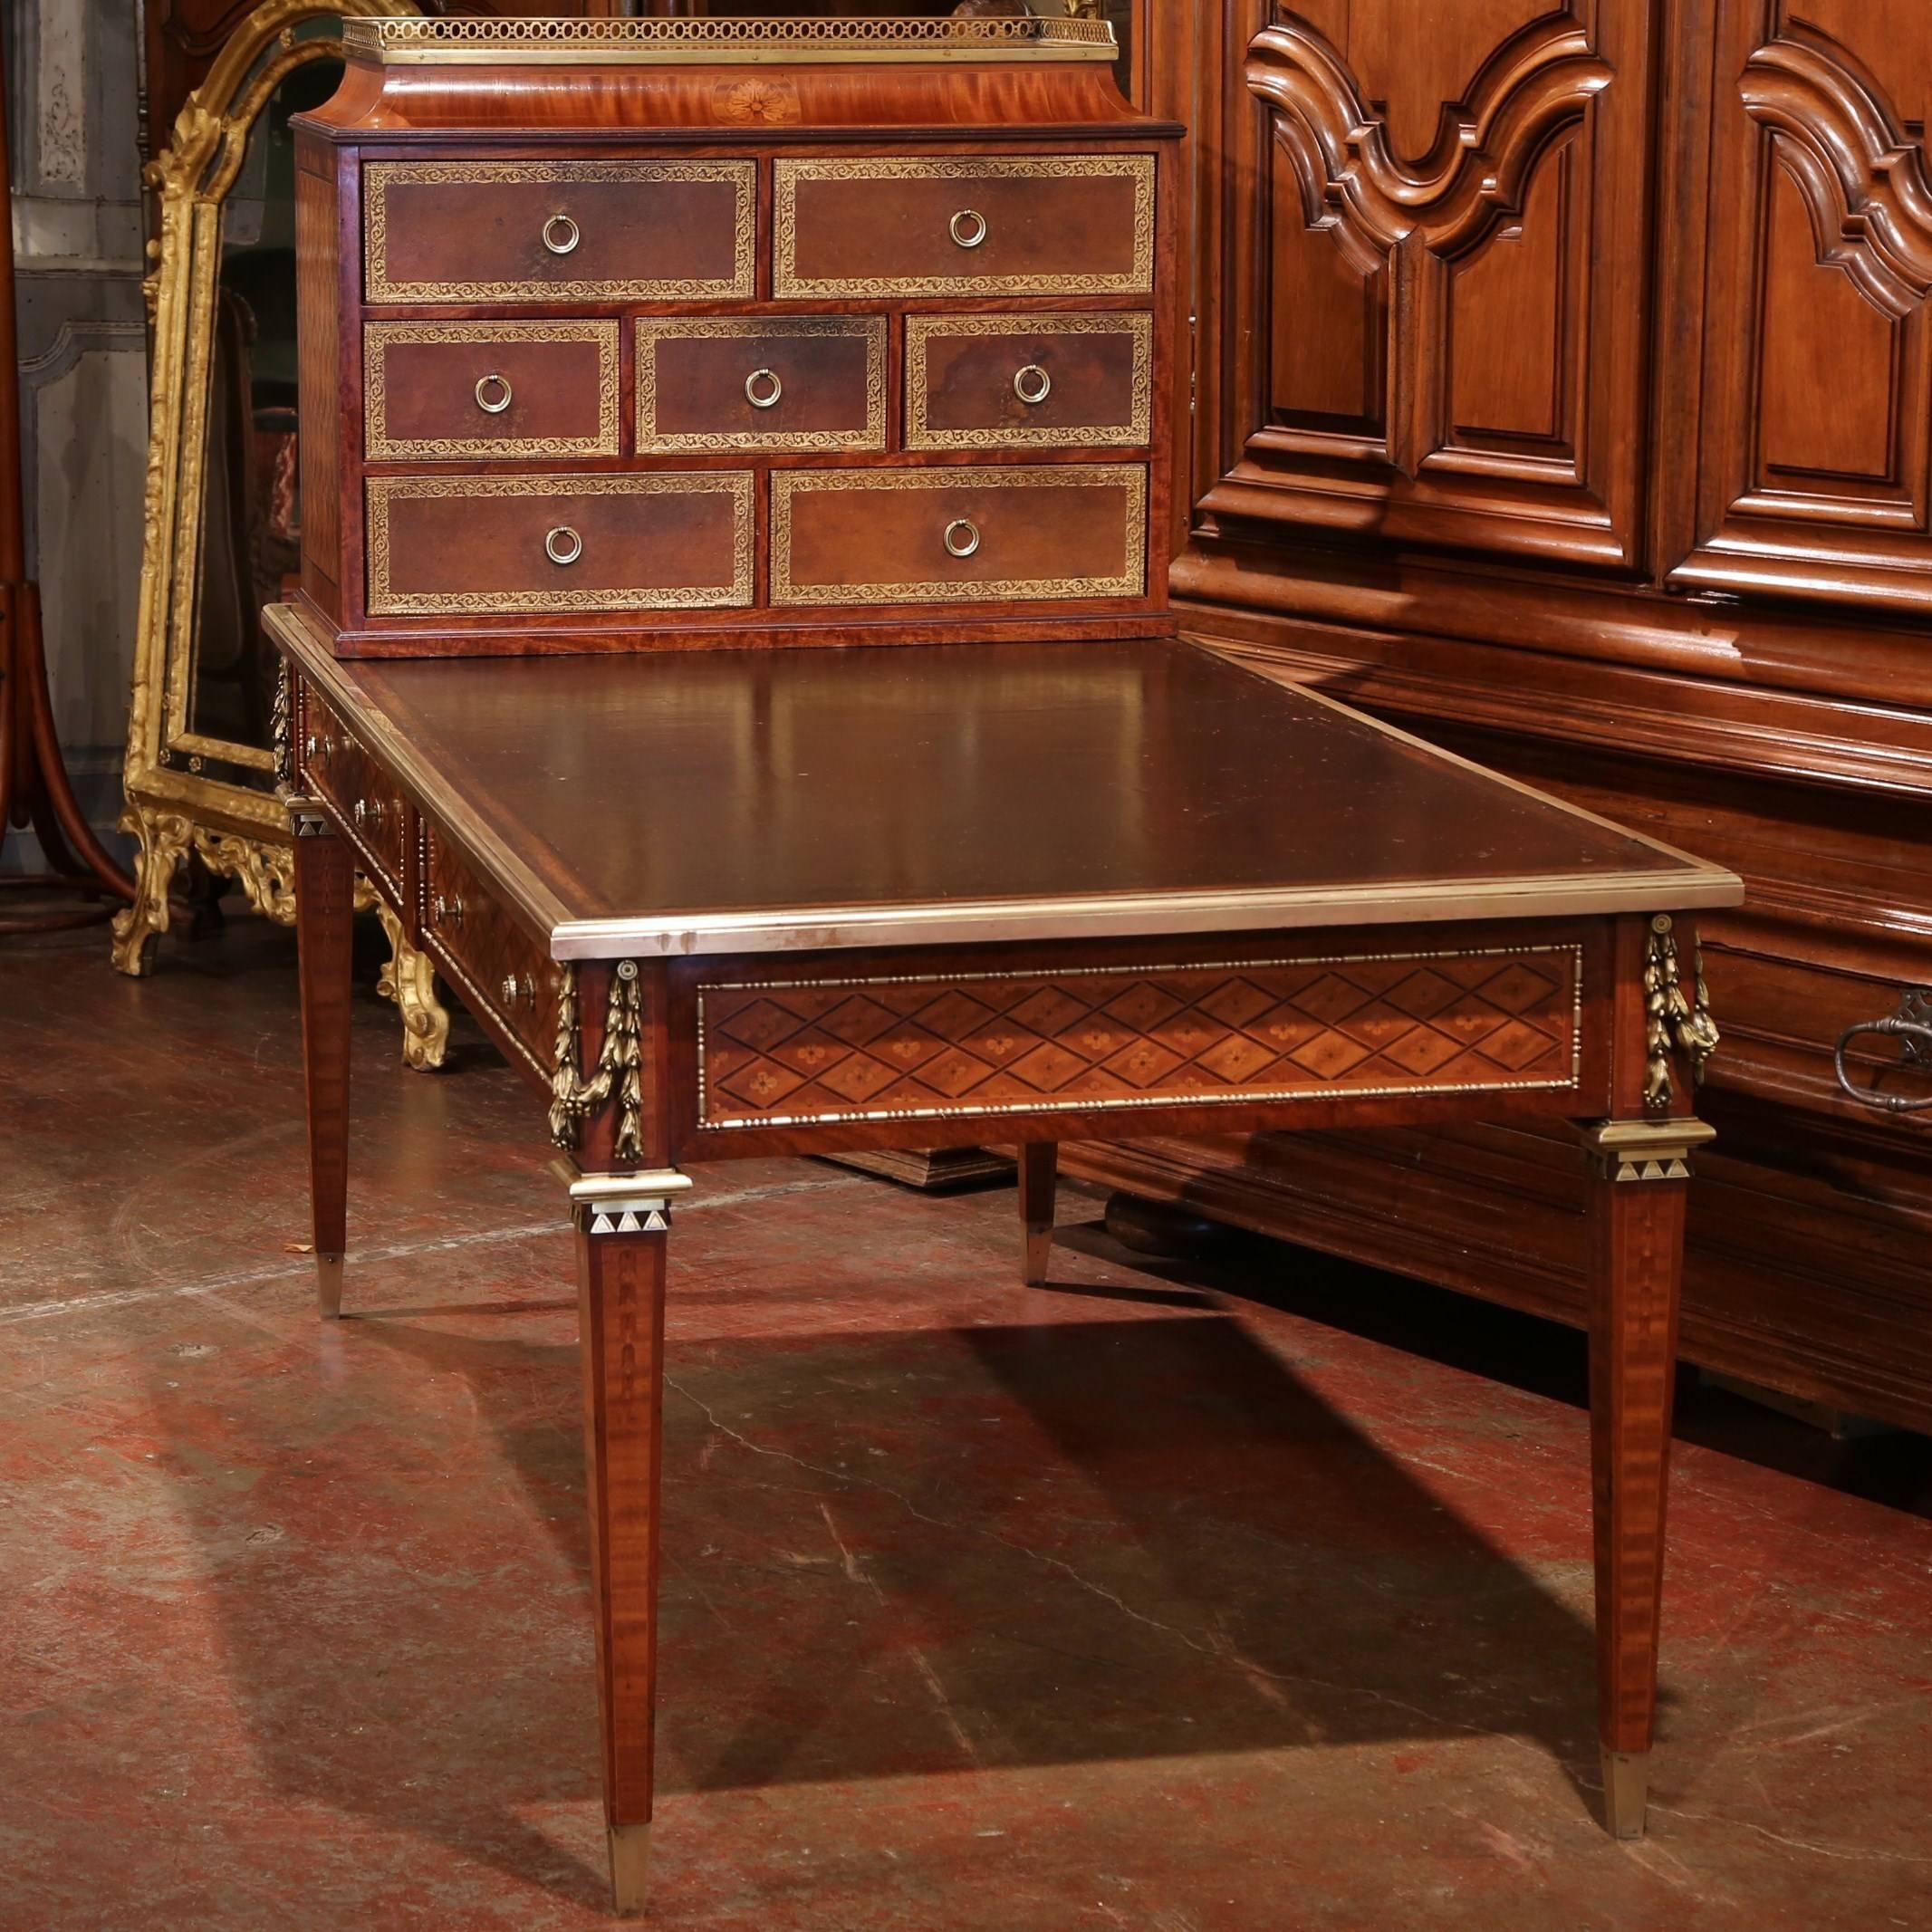 Perfect for a study or home office, this elegant 19th century Louis XVI 